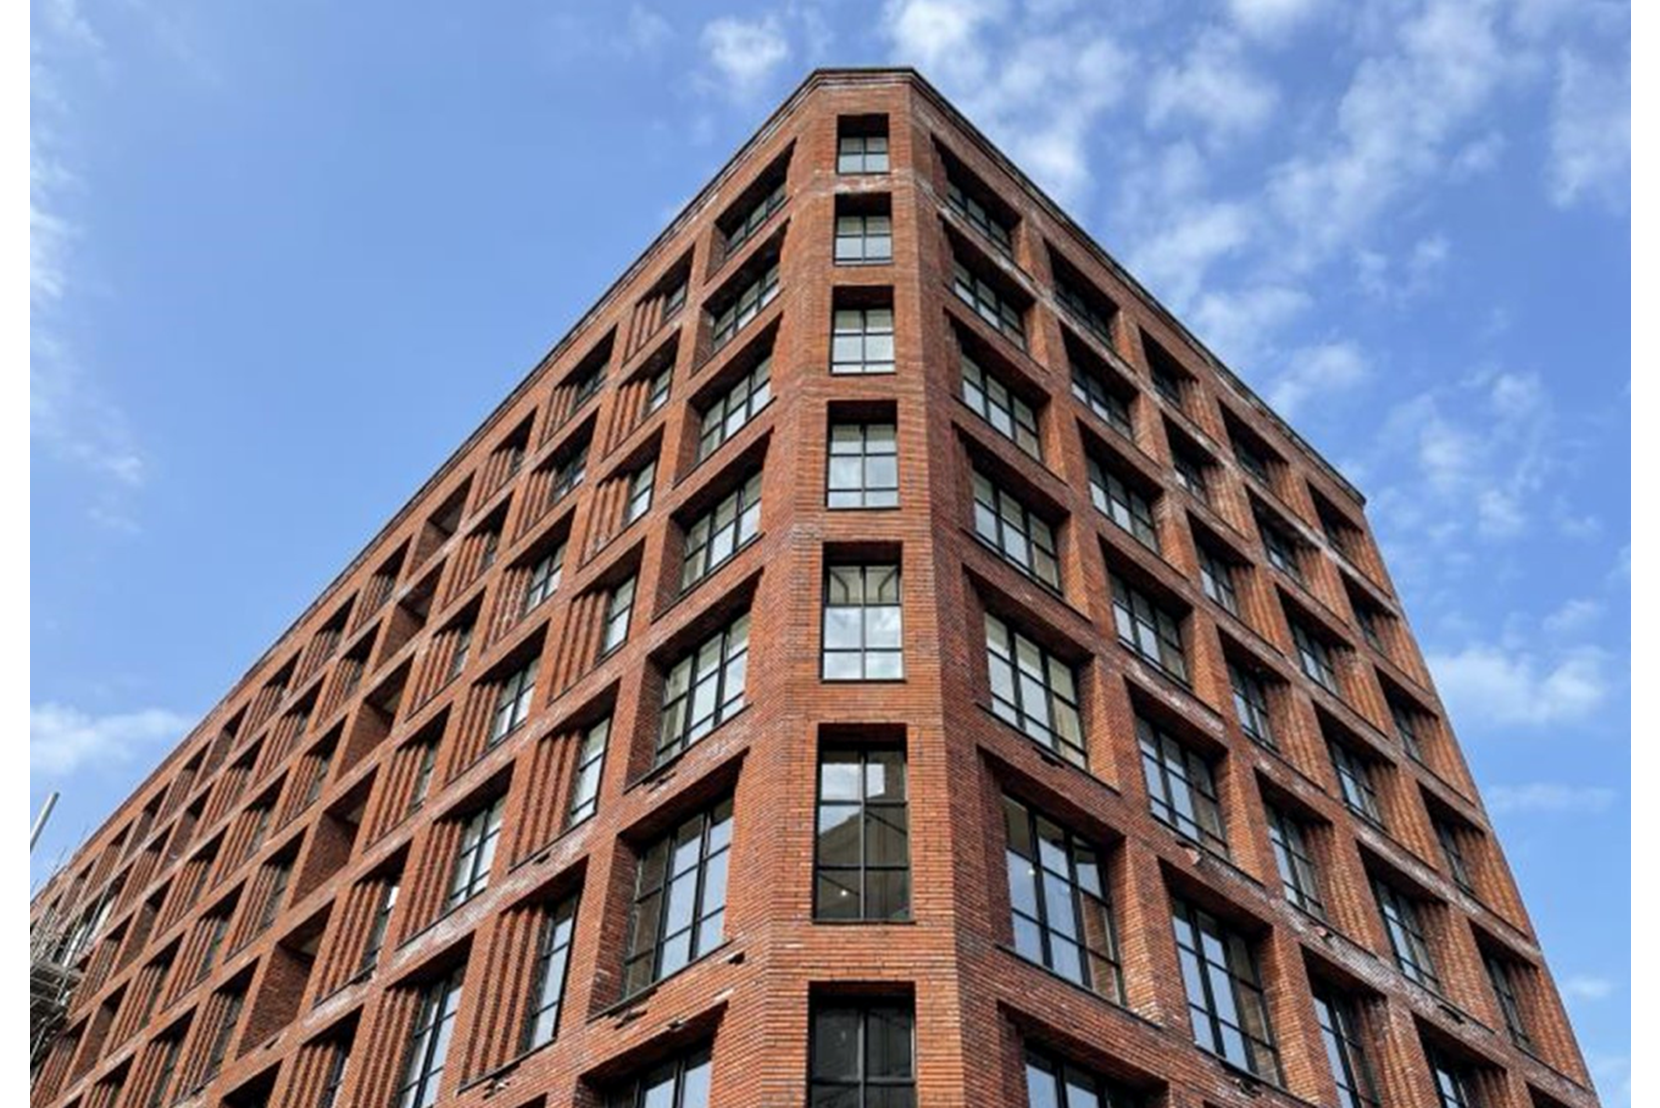 Apartments to Rent by Northern Group at One Silk Street, Manchester, M4, building panoramic